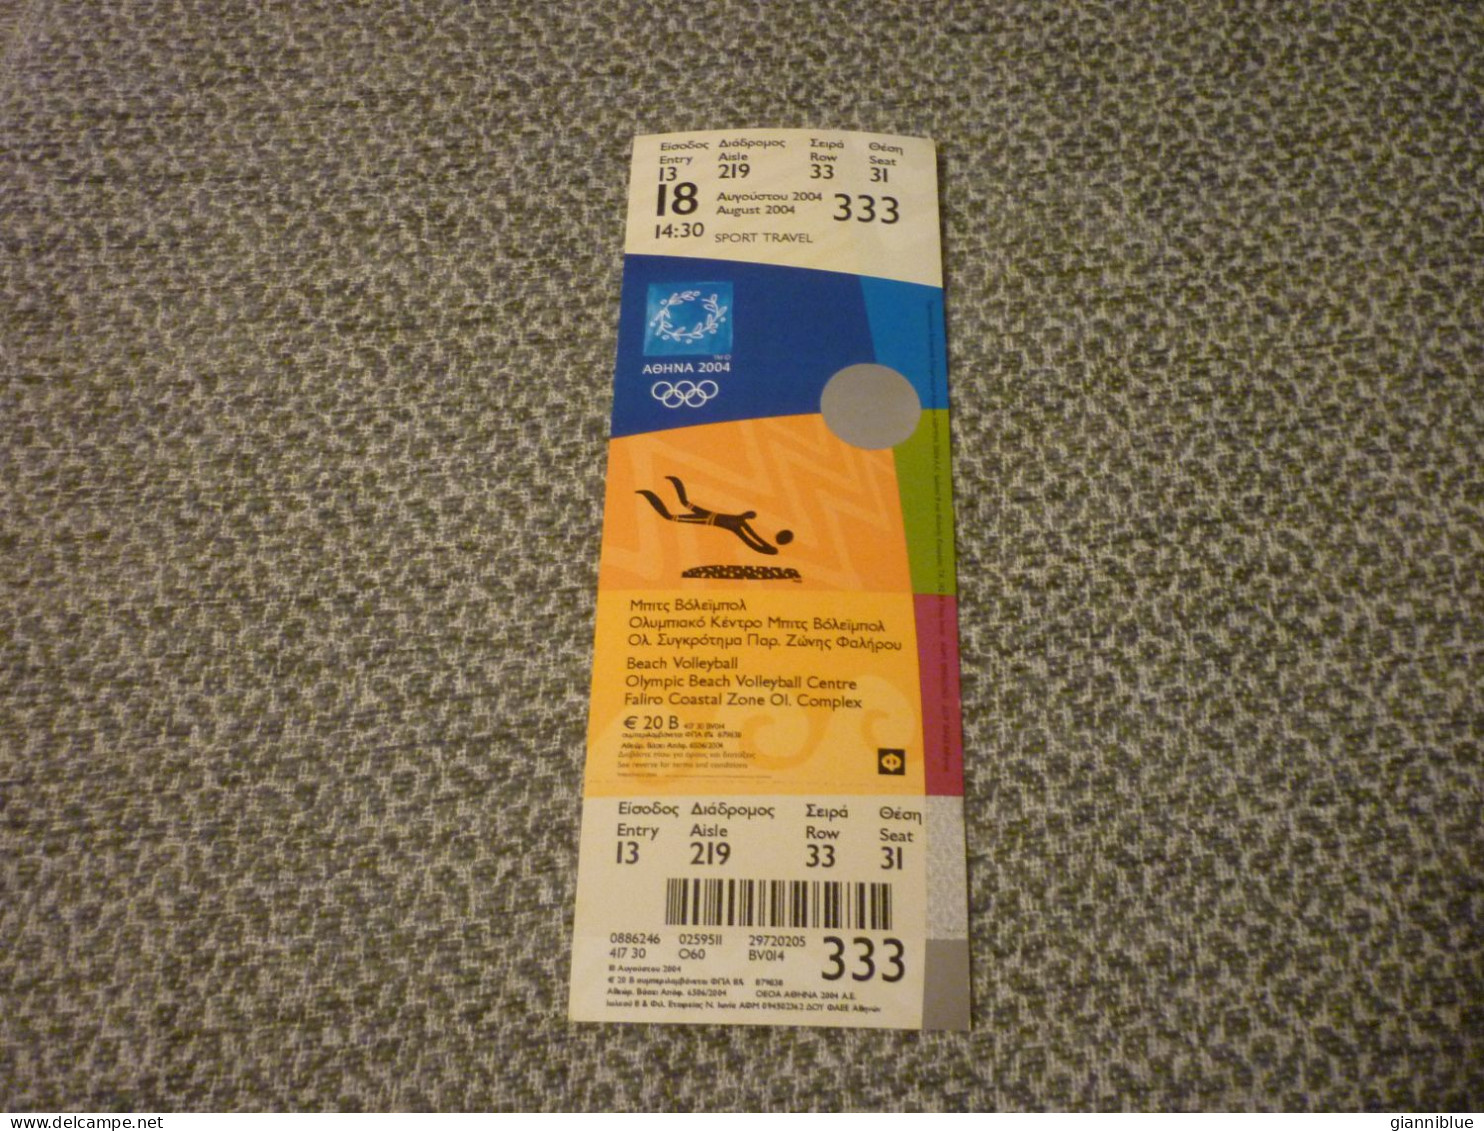 Beach Volleyball Athens 2004 Olympic Games Greece Greek Mint Unused Match Ticket Stub 18/08/2004 14:30 #333 - Apparel, Souvenirs & Other